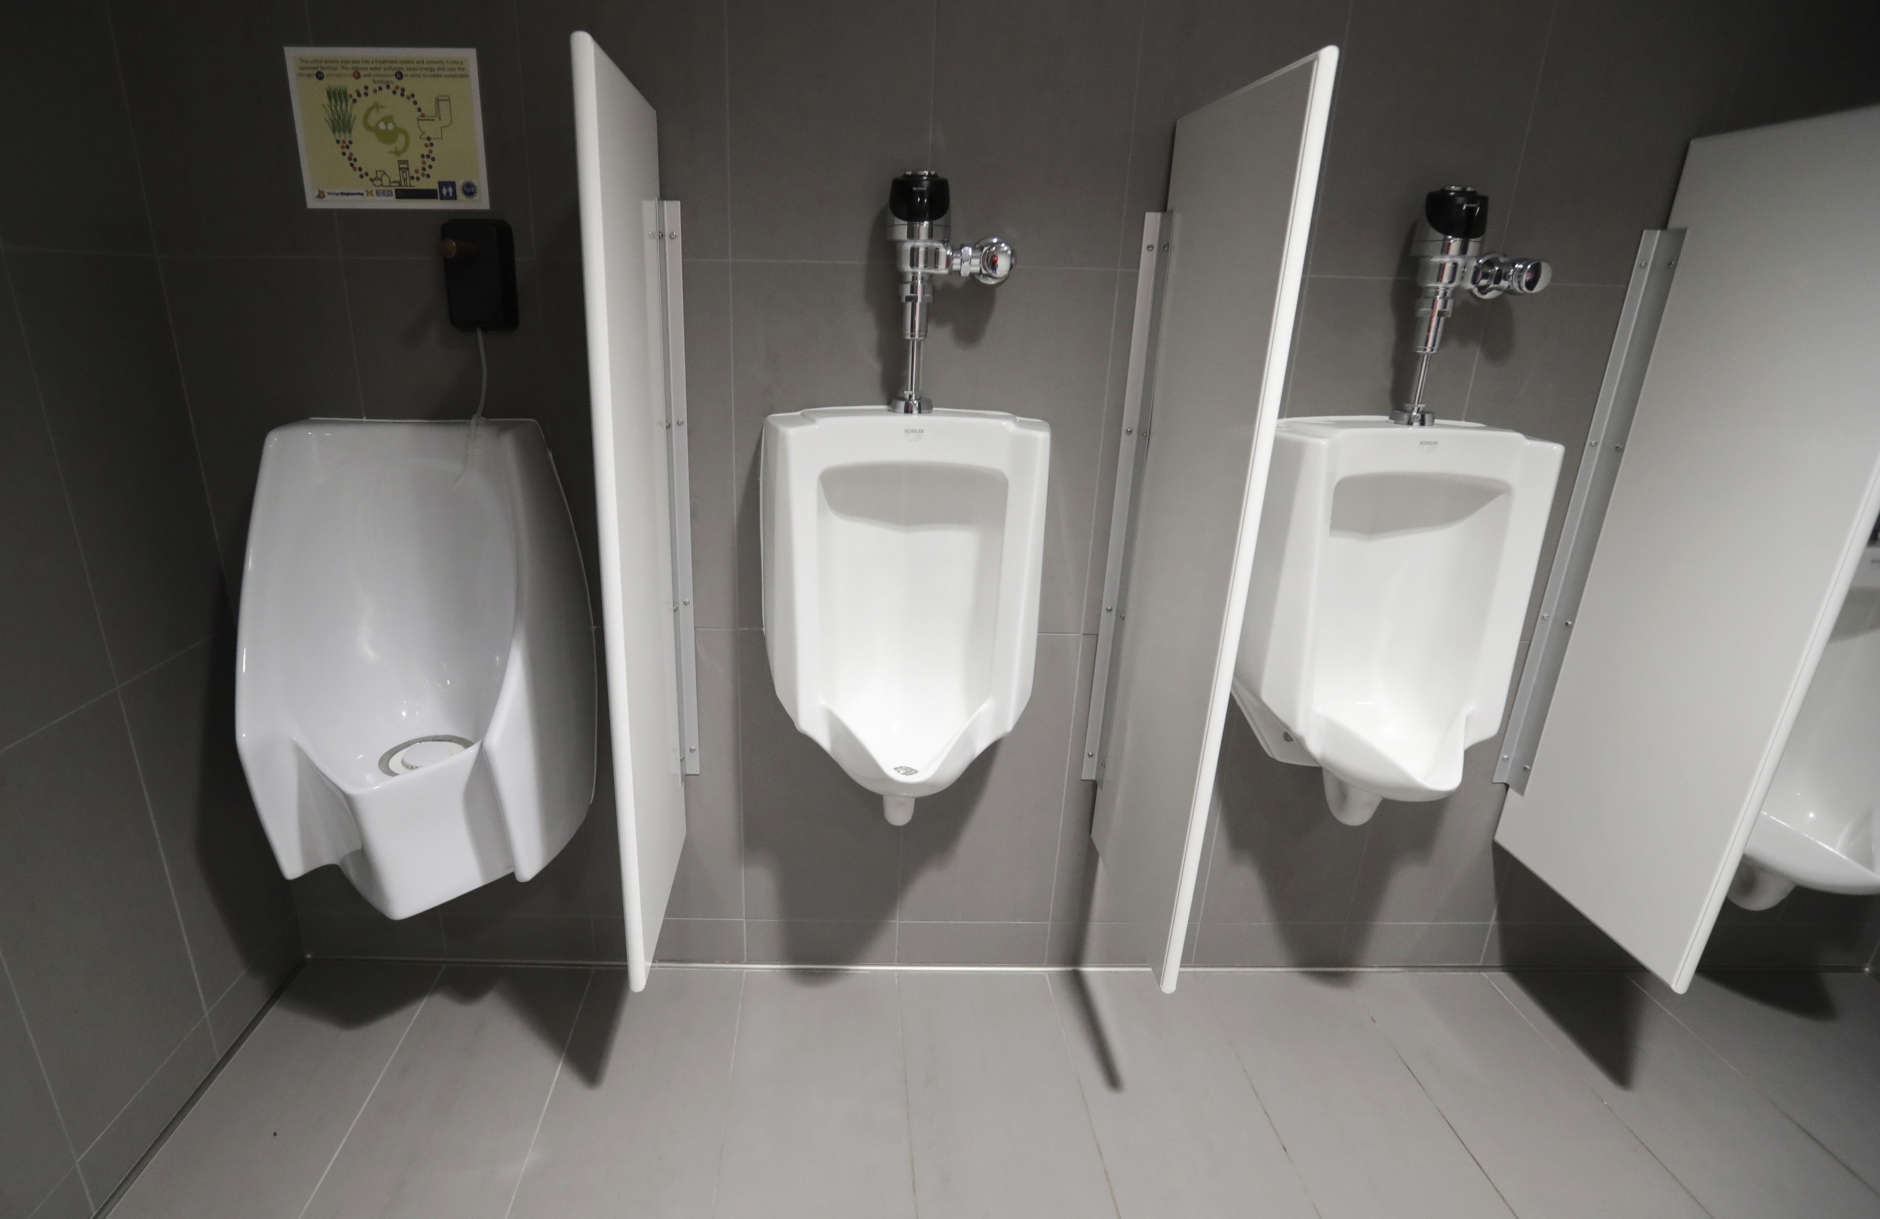 A waterless urinal, left, is shown next to standard urinals at the University of Michigan engineering building, Tuesday, Jan. 24, 2017, in Ann Arbor, Mich. The waterless toilet is connected to a collection and filtration system which is part of a multi-state project researching the conversion of human urine into fertilizer. (AP Photo/Carlos Osorio)